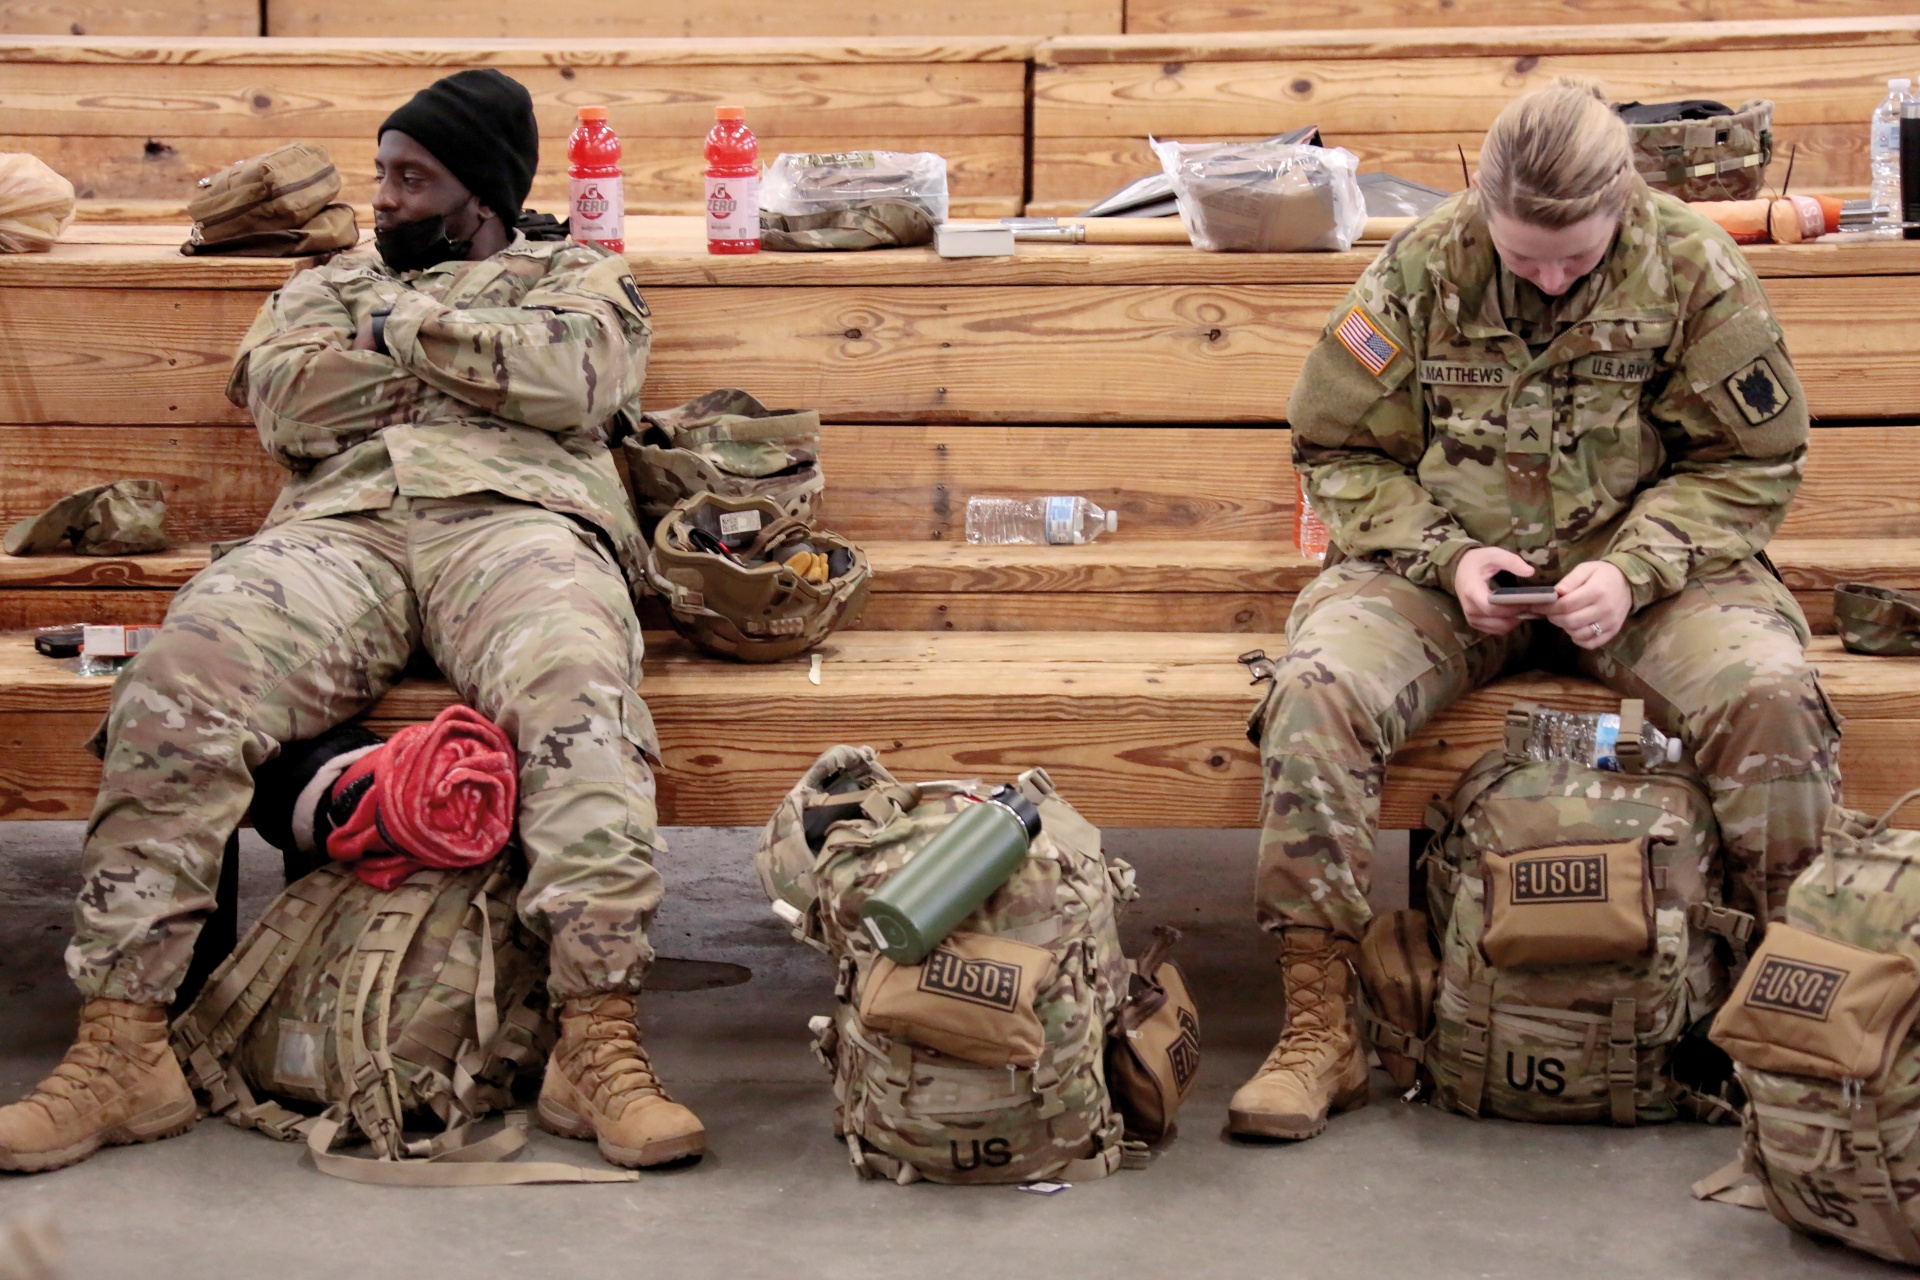 US Army soldiers from the 18th Airborne Division sit in the staging area as they wait to board a C-17 aircraft to deploy to Europe from Fort Bragg, February 3, 2022.